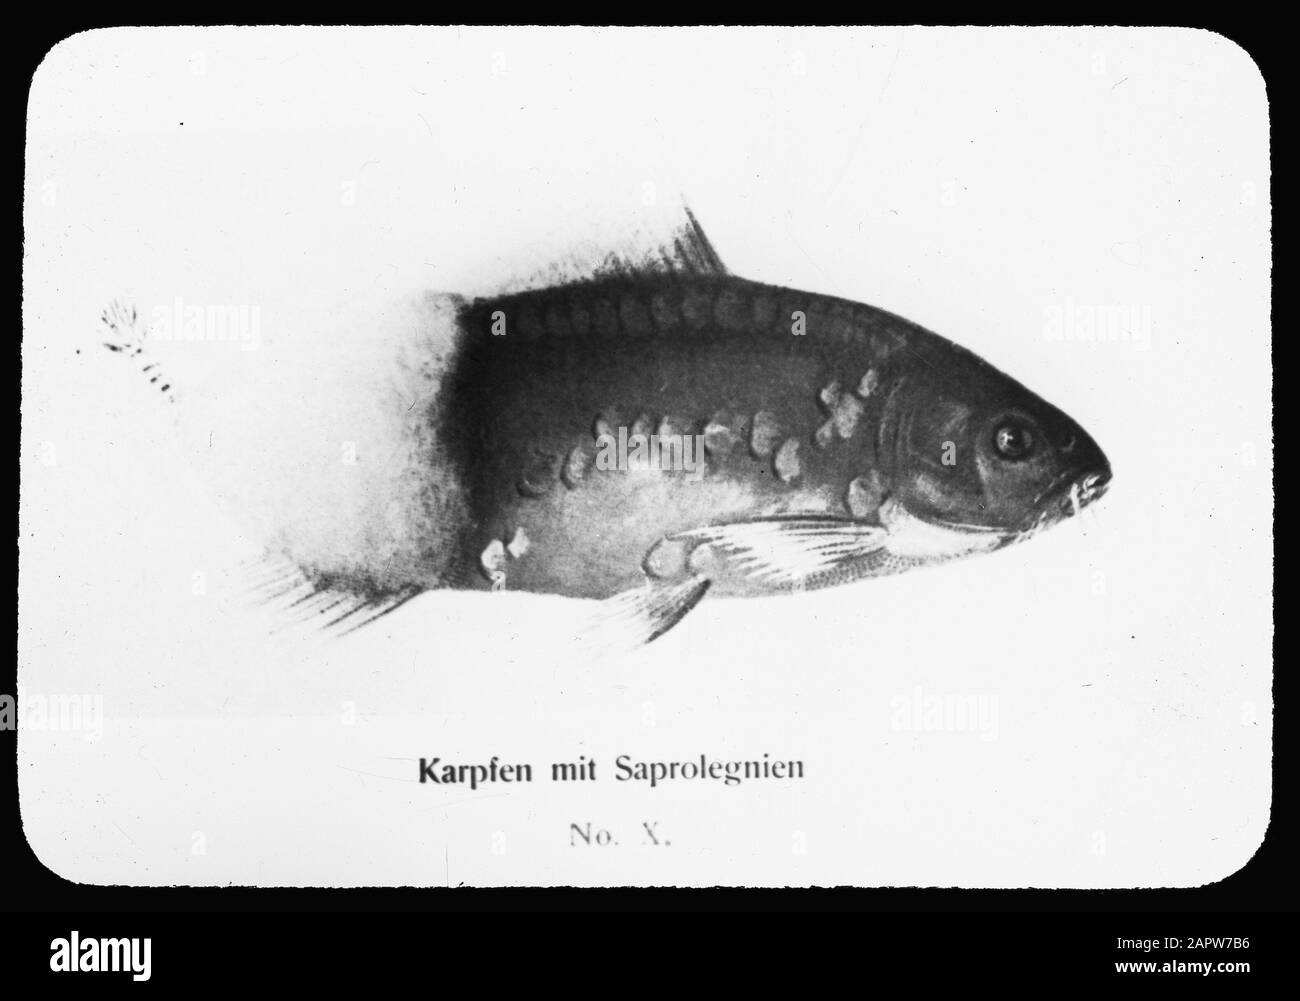 infection Date: undated Keywords: freshwater fishing Person name: saprolegnia Stock Photo